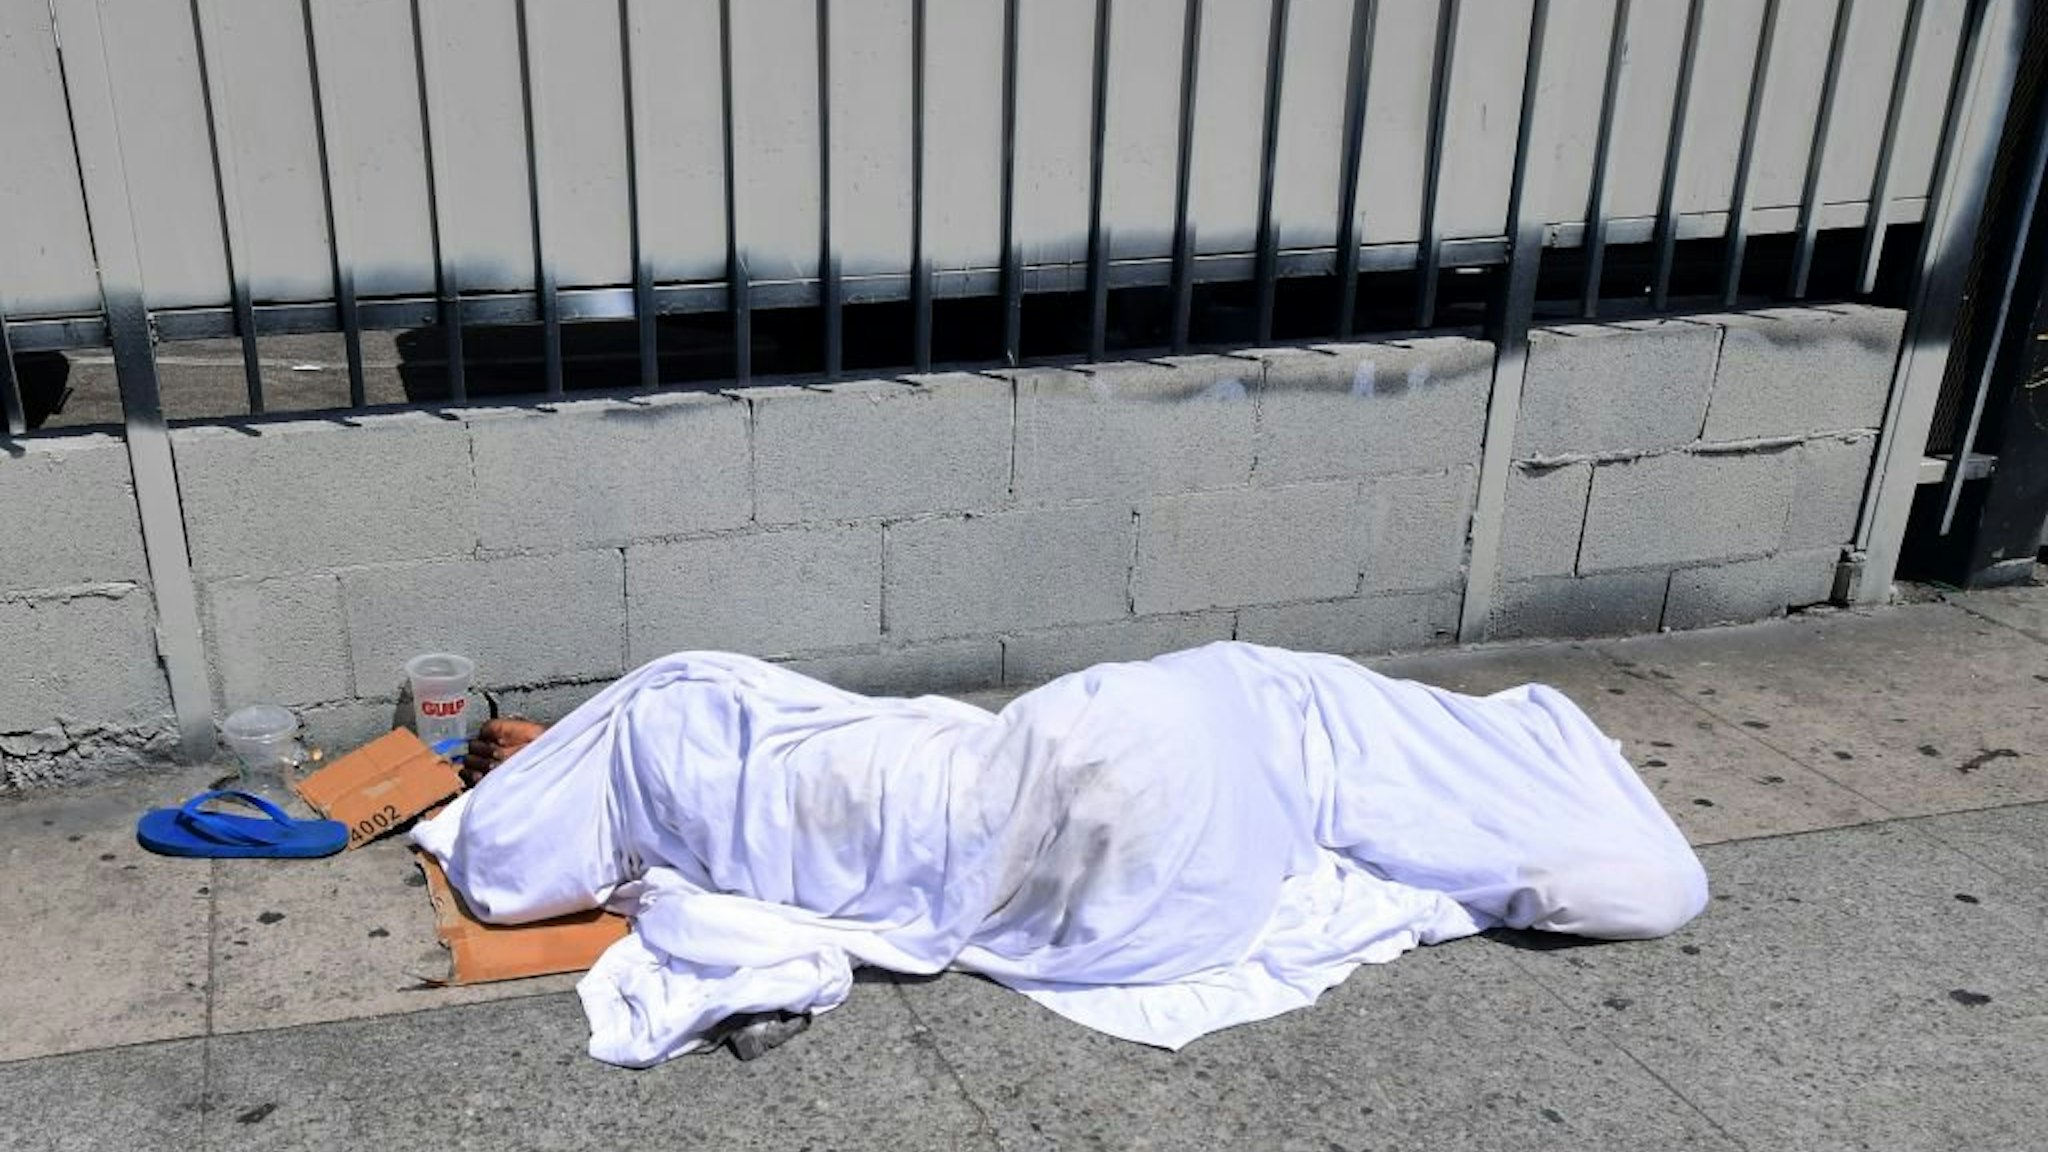 Homeless person sleeping in the street